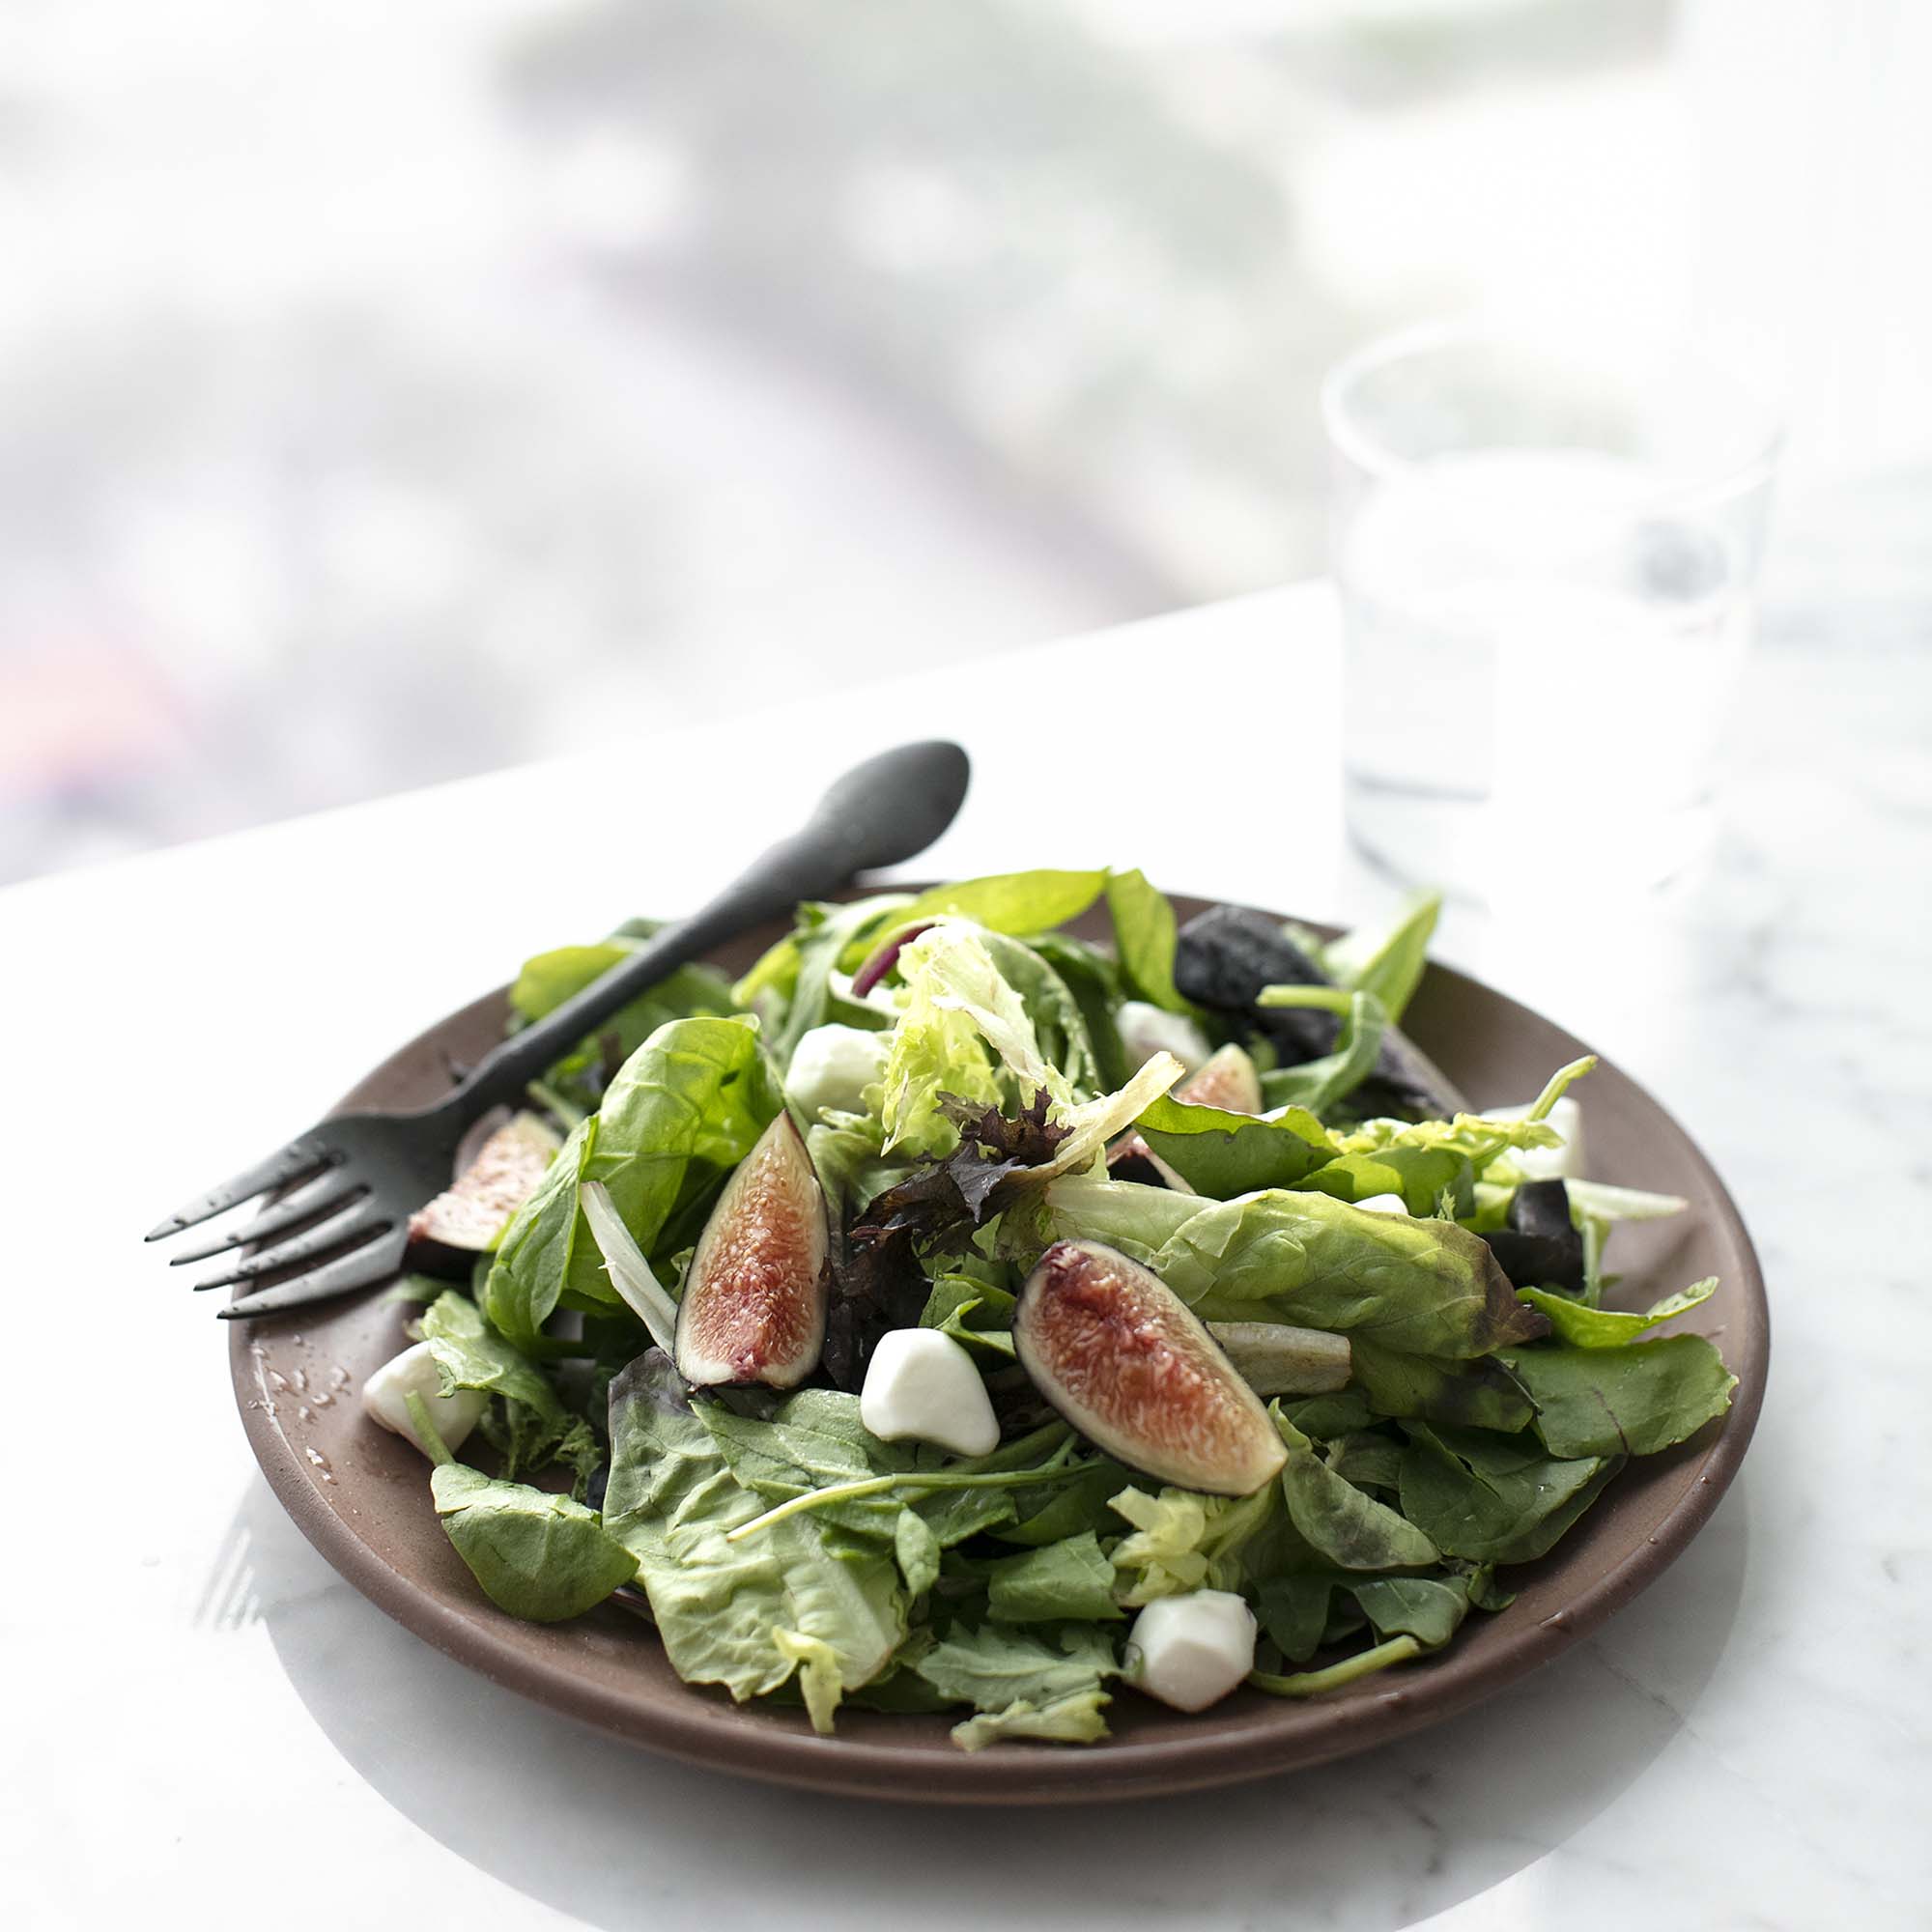 A salad with figs and a fork.